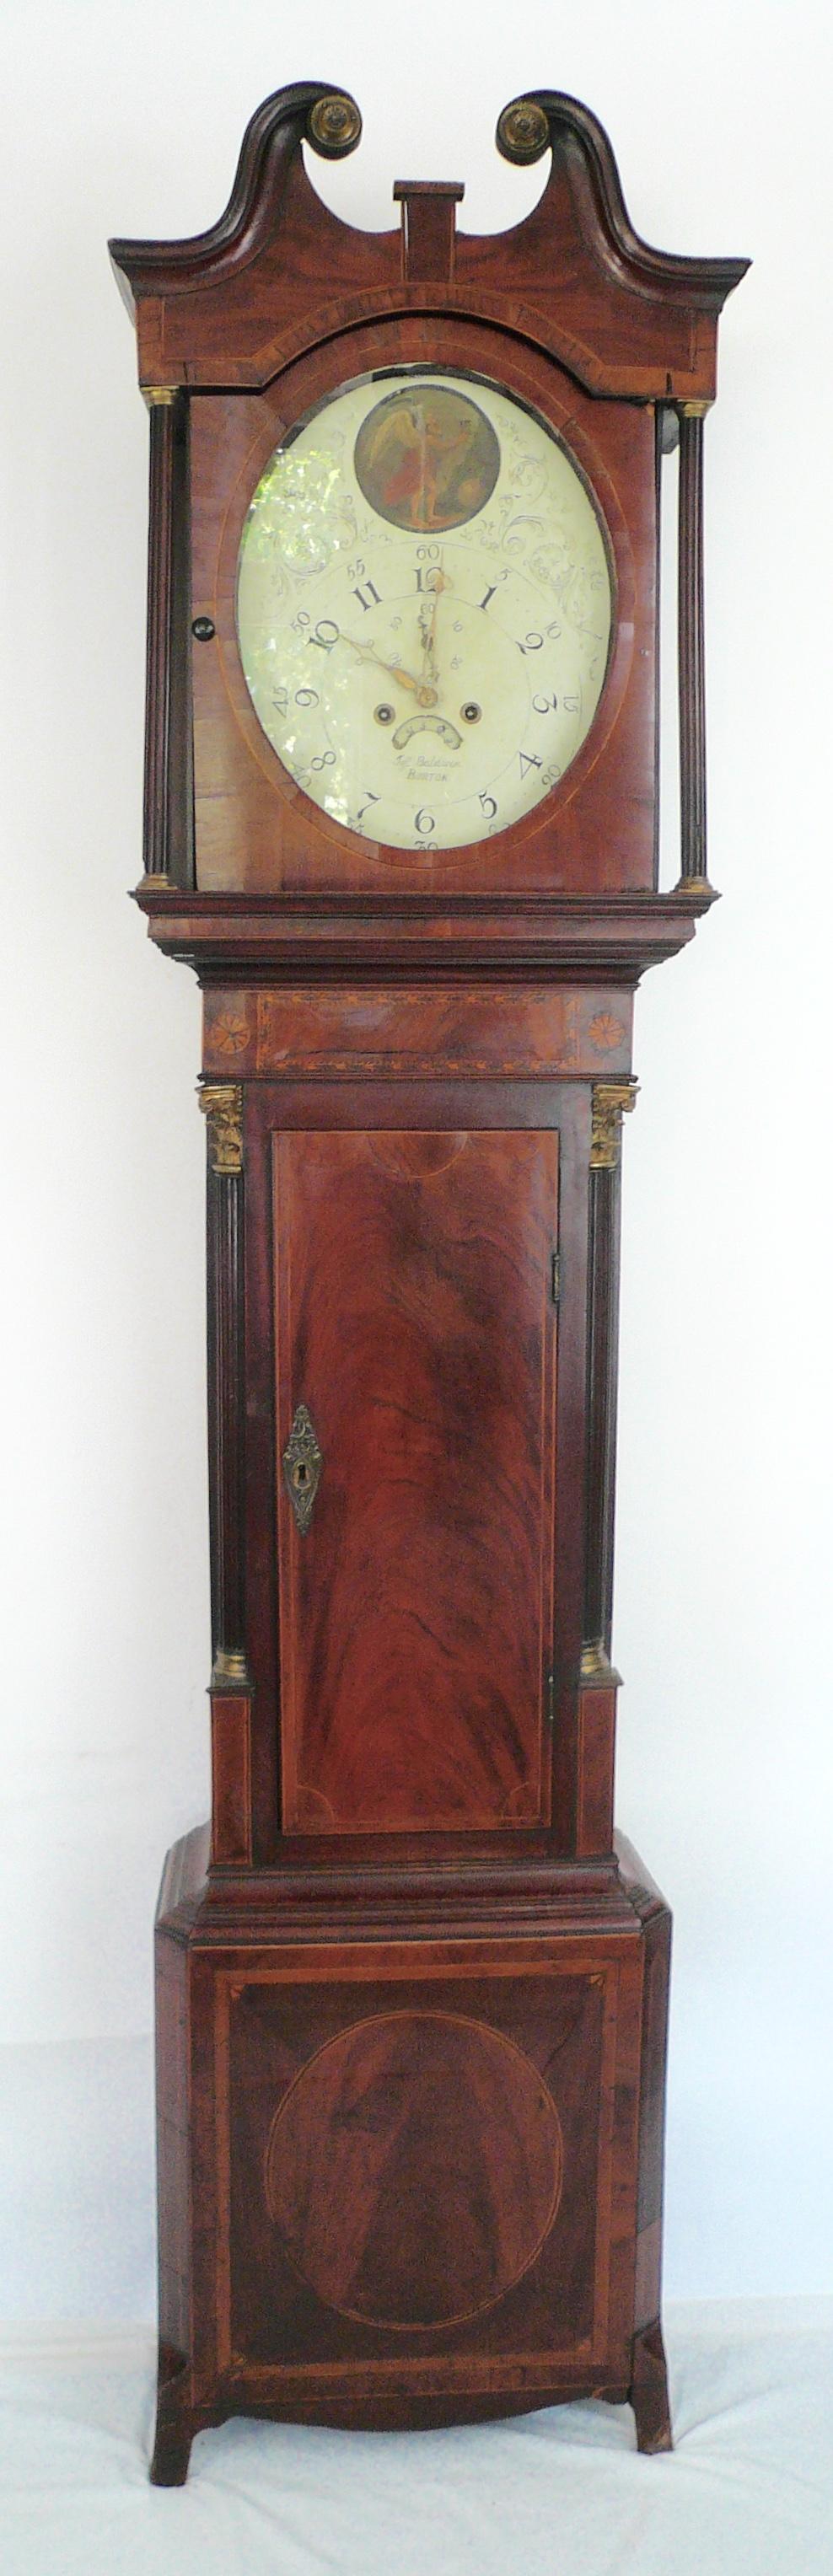 This beautiful inlay mahogany clock features a hand painted oval dial, broken arch pediment, and fluted columns.